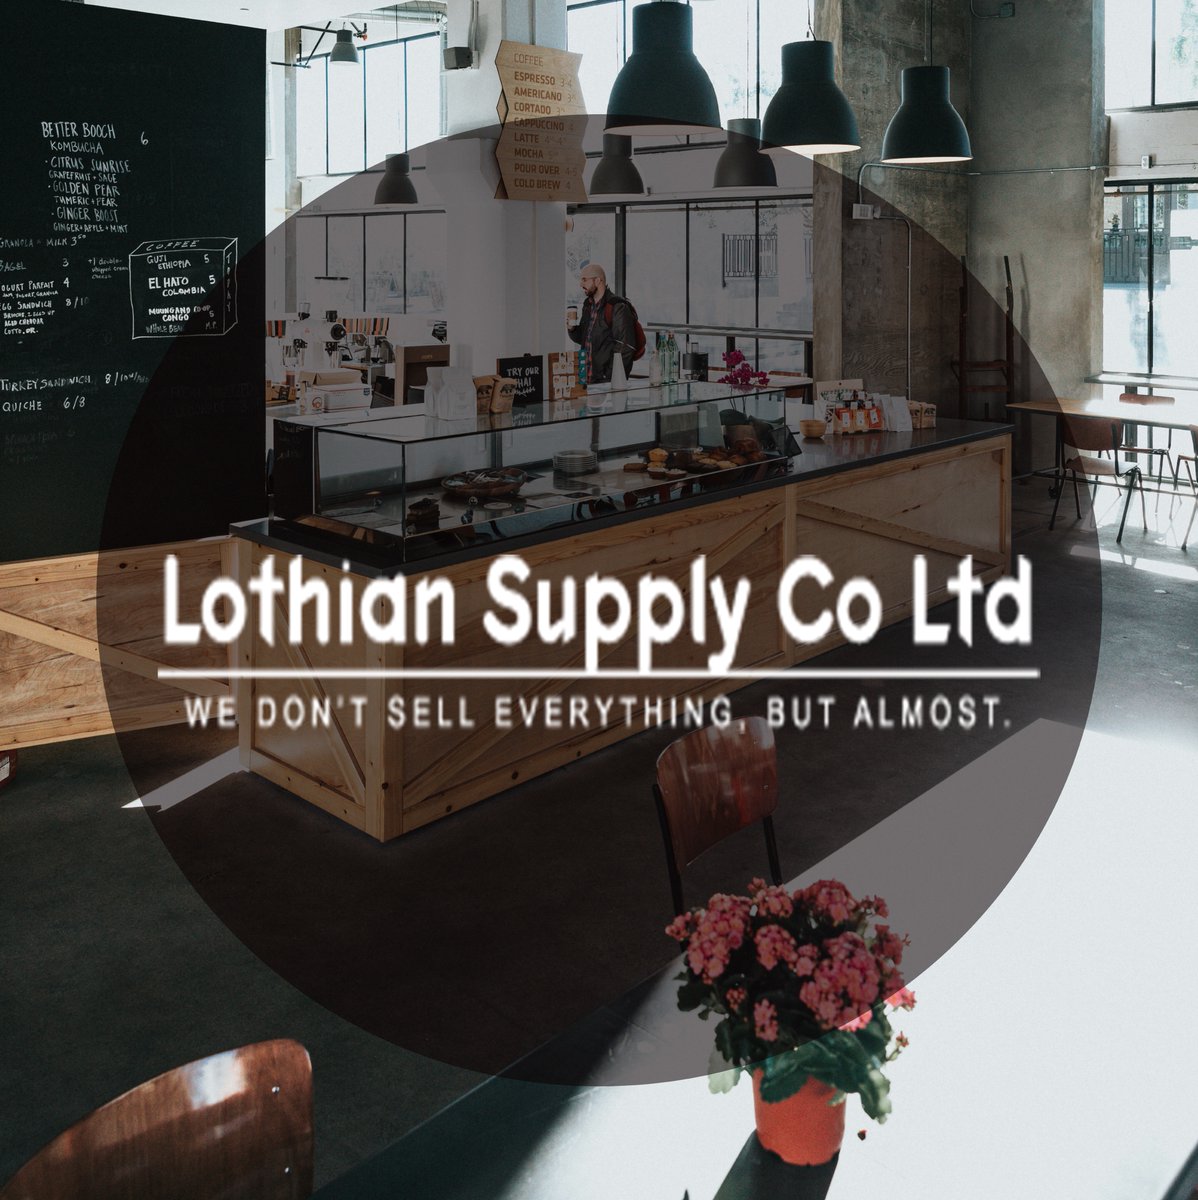 We can supply everything you need for your business. ✔️Janitorial products ✔️Cleaning chemicals ✔️Takeaway Packaging ✔️Glassware & crockery ✔️Beverage gas We would love to talk to you to see how we can help your business. Call - 01506 871 720